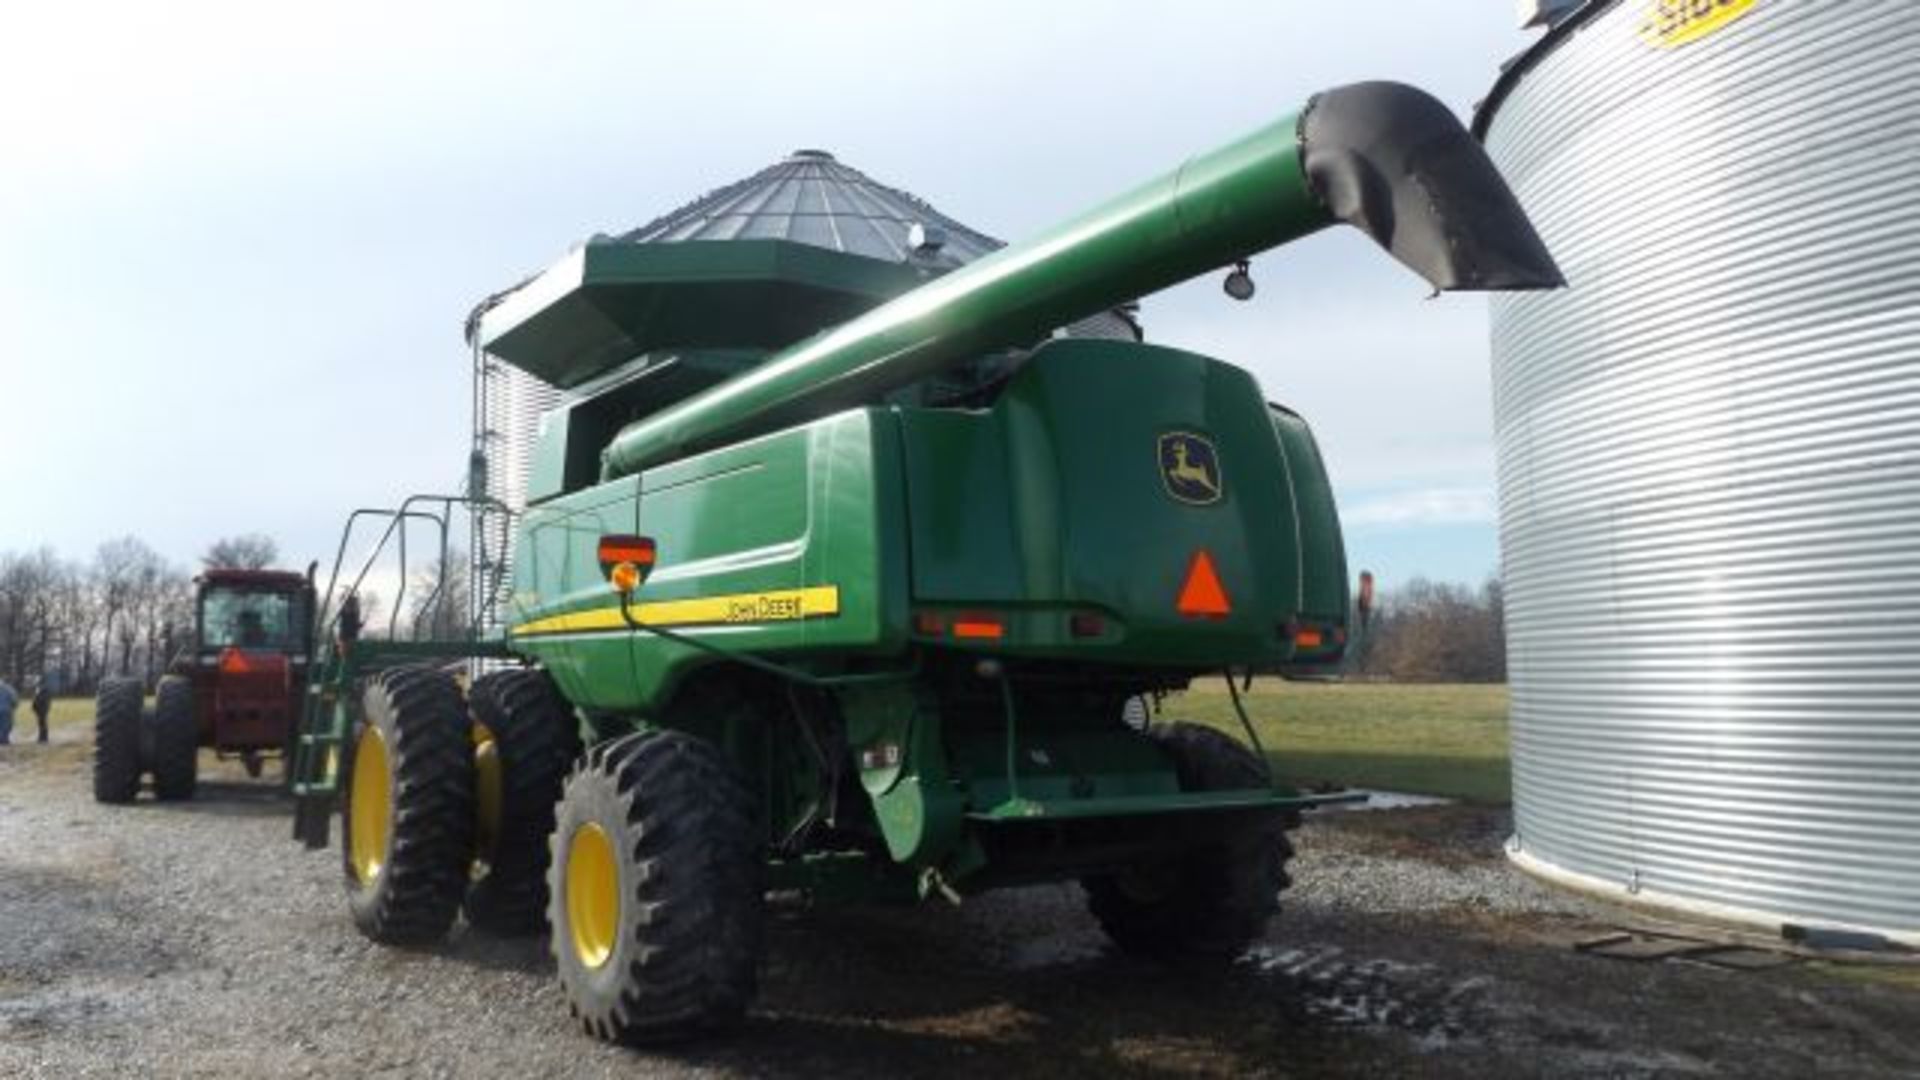 2009 JD 9770 Combine, 1475/1150 Hrs., Contour Master, 4wd, Extended Wear Concaves, High Capacity - Image 4 of 5